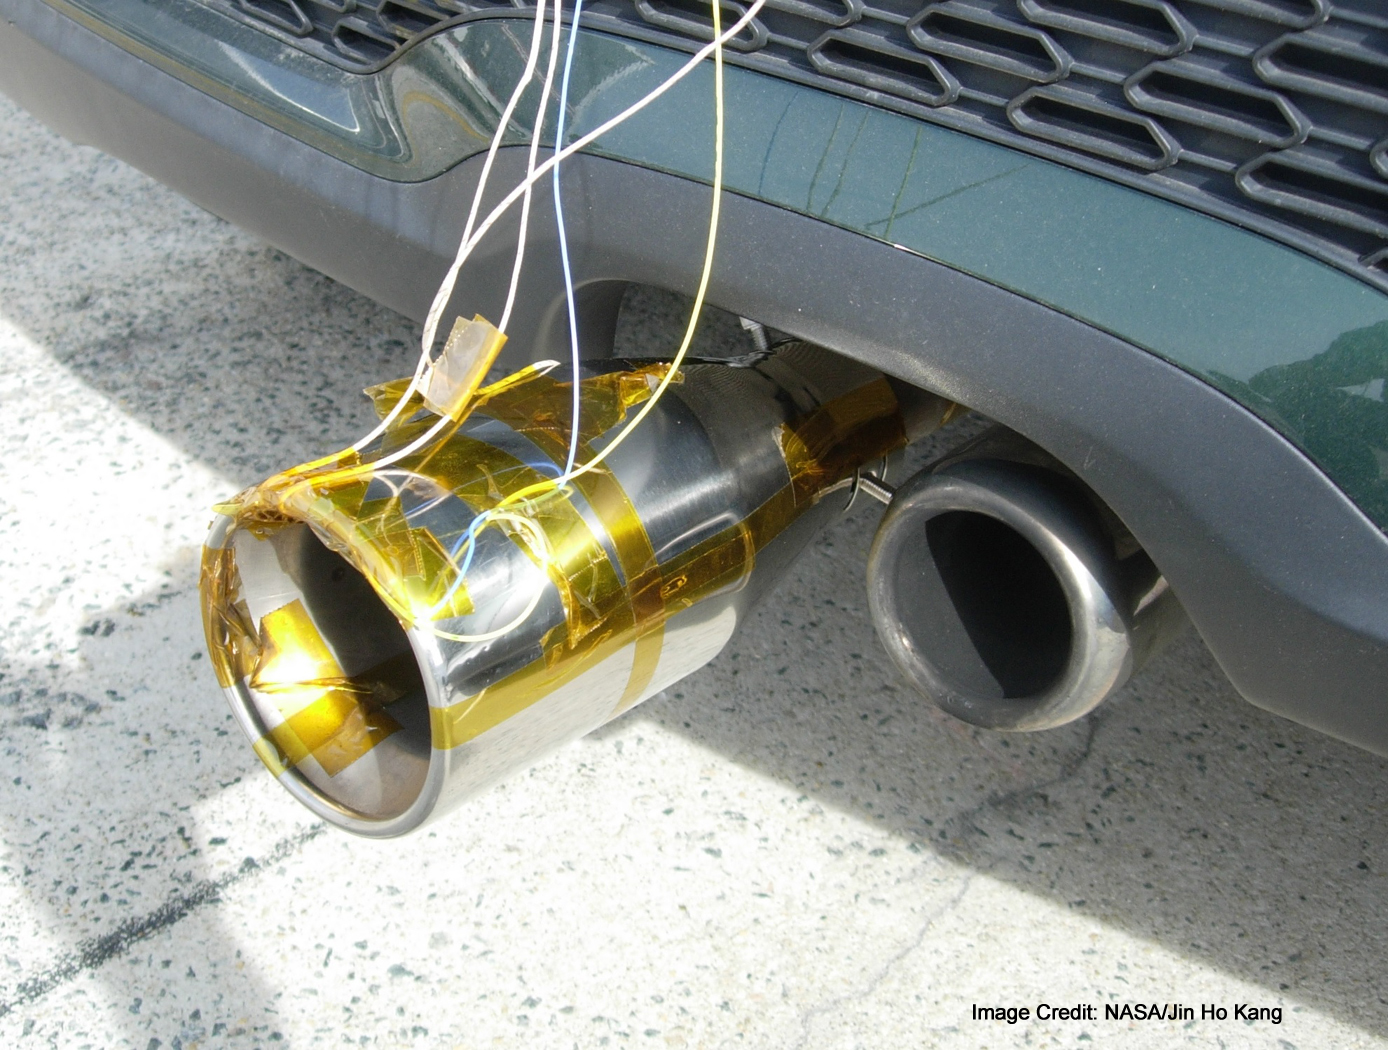 Device Attached to the Exhaust System of a Test Vehicle.